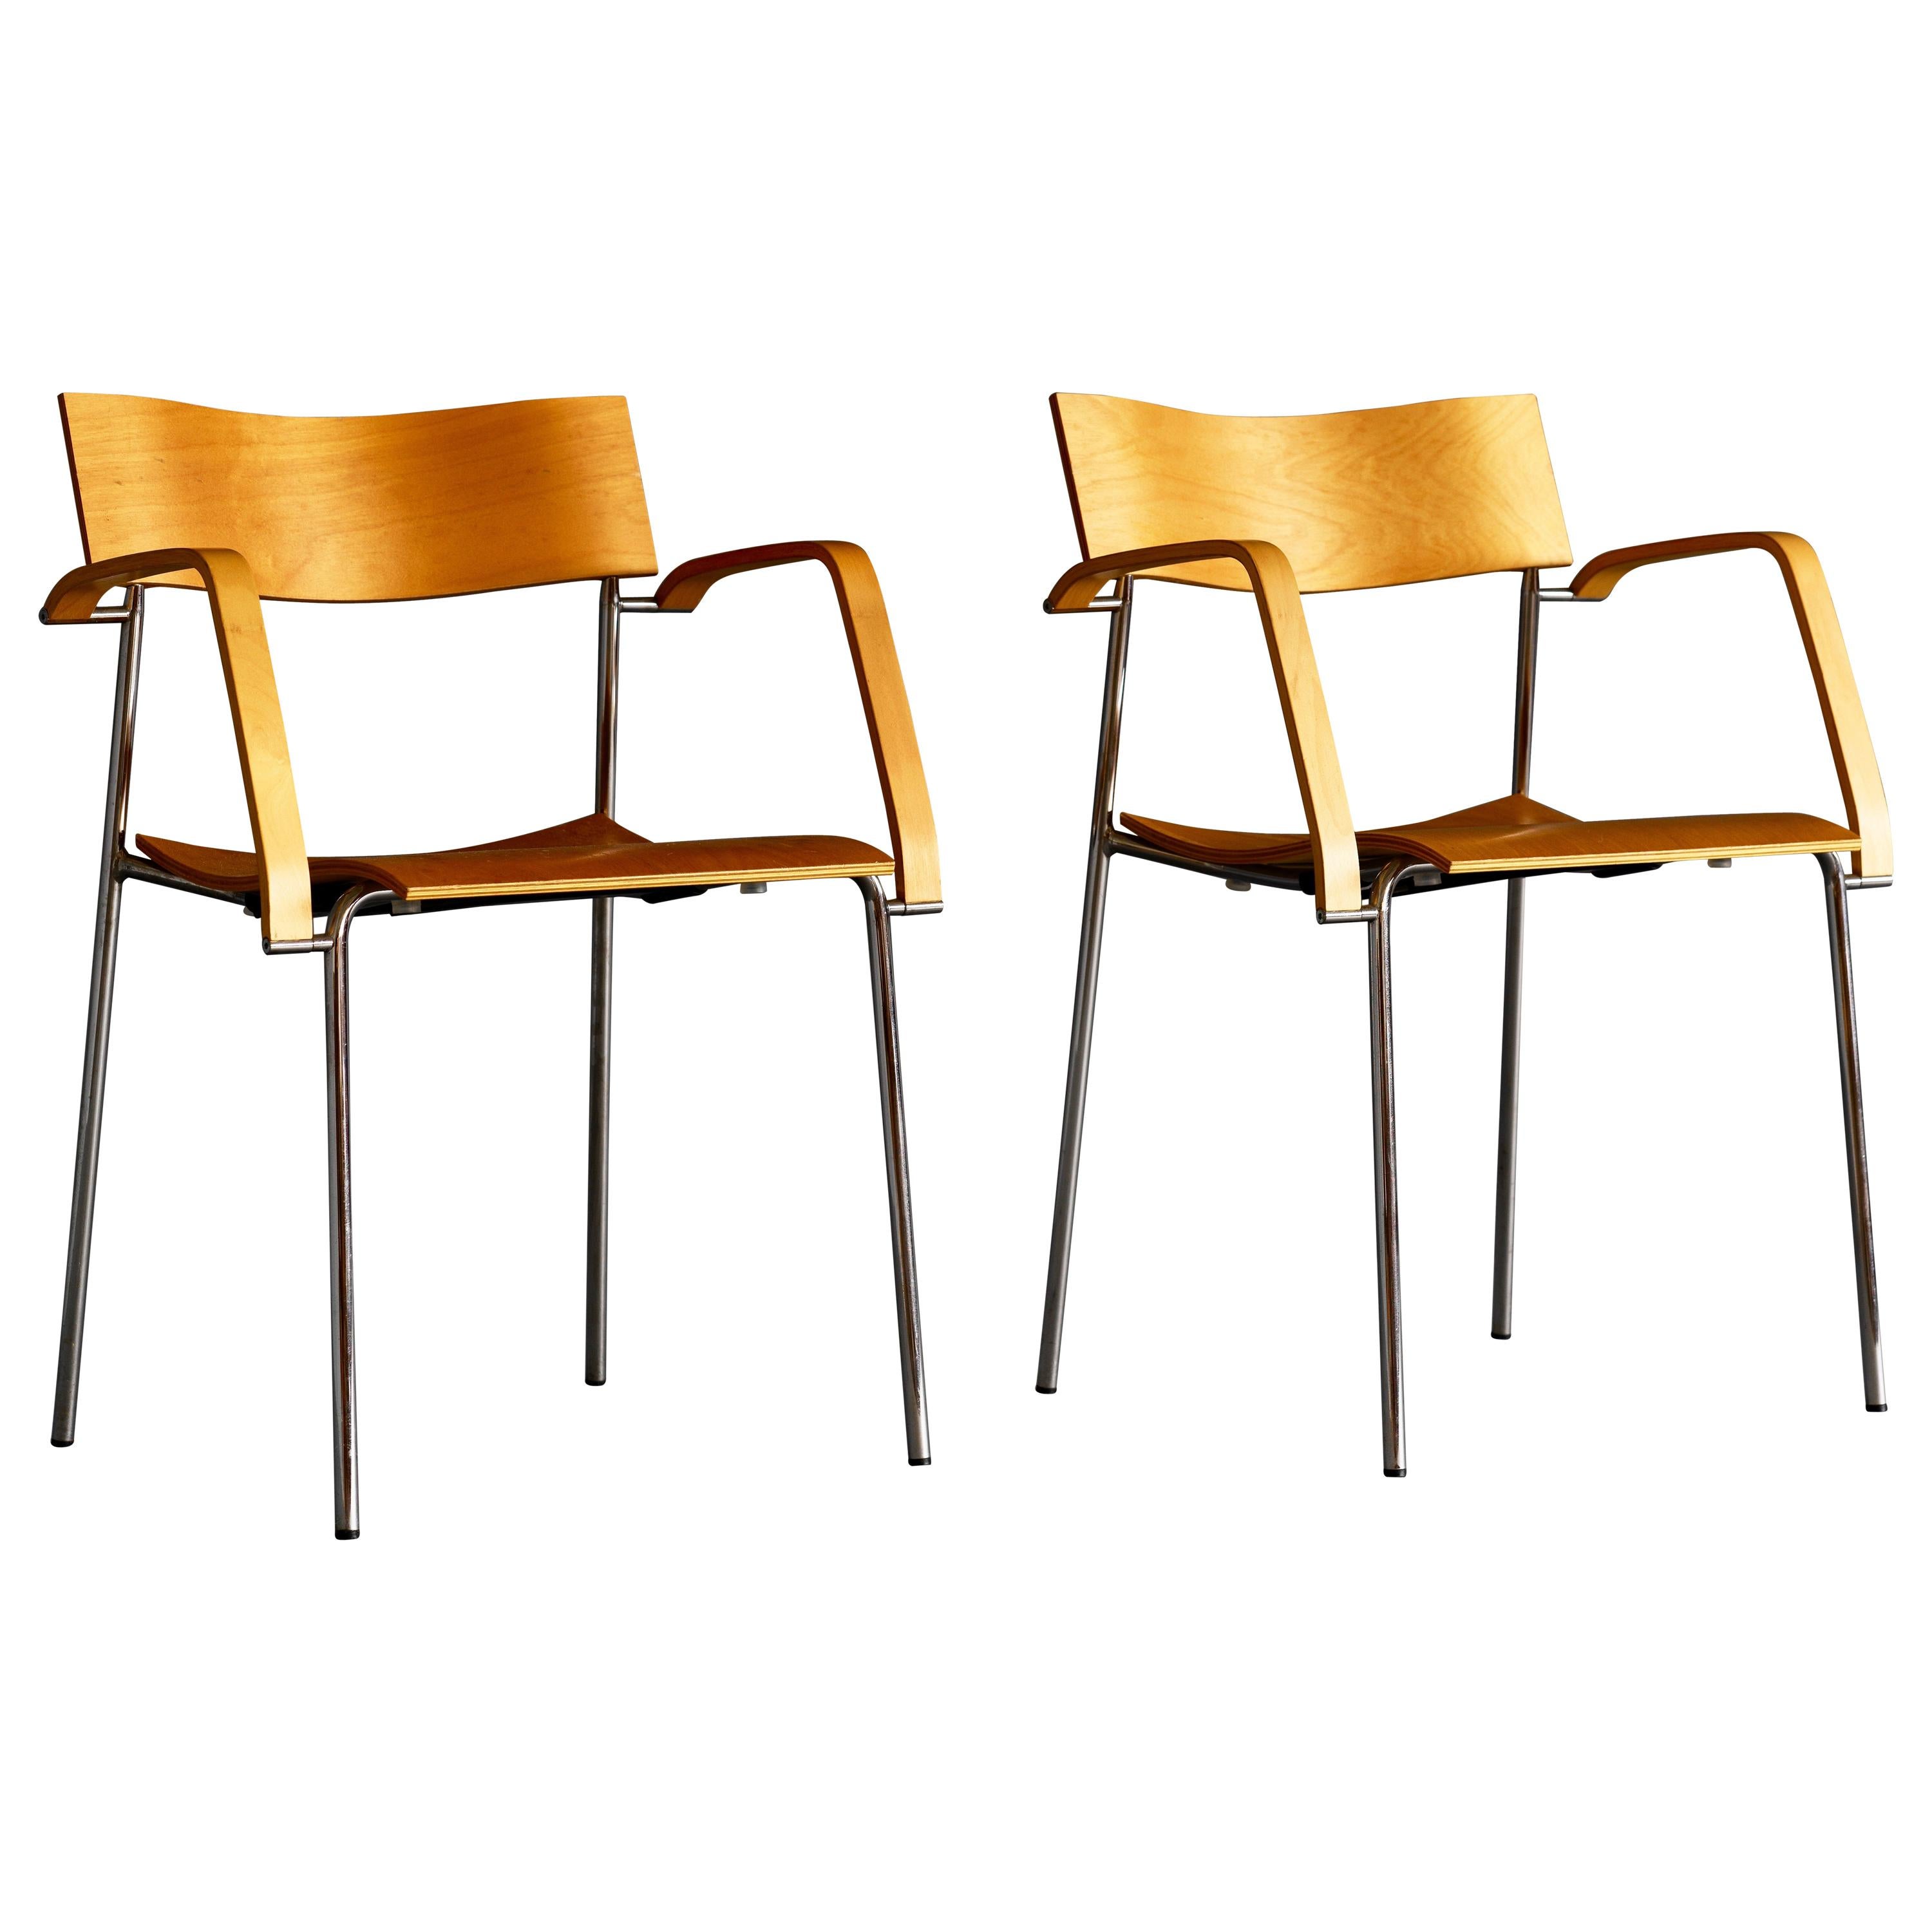 Chair by Peter Hiort-Lorenzen and Johannes Foersom for Lammhults